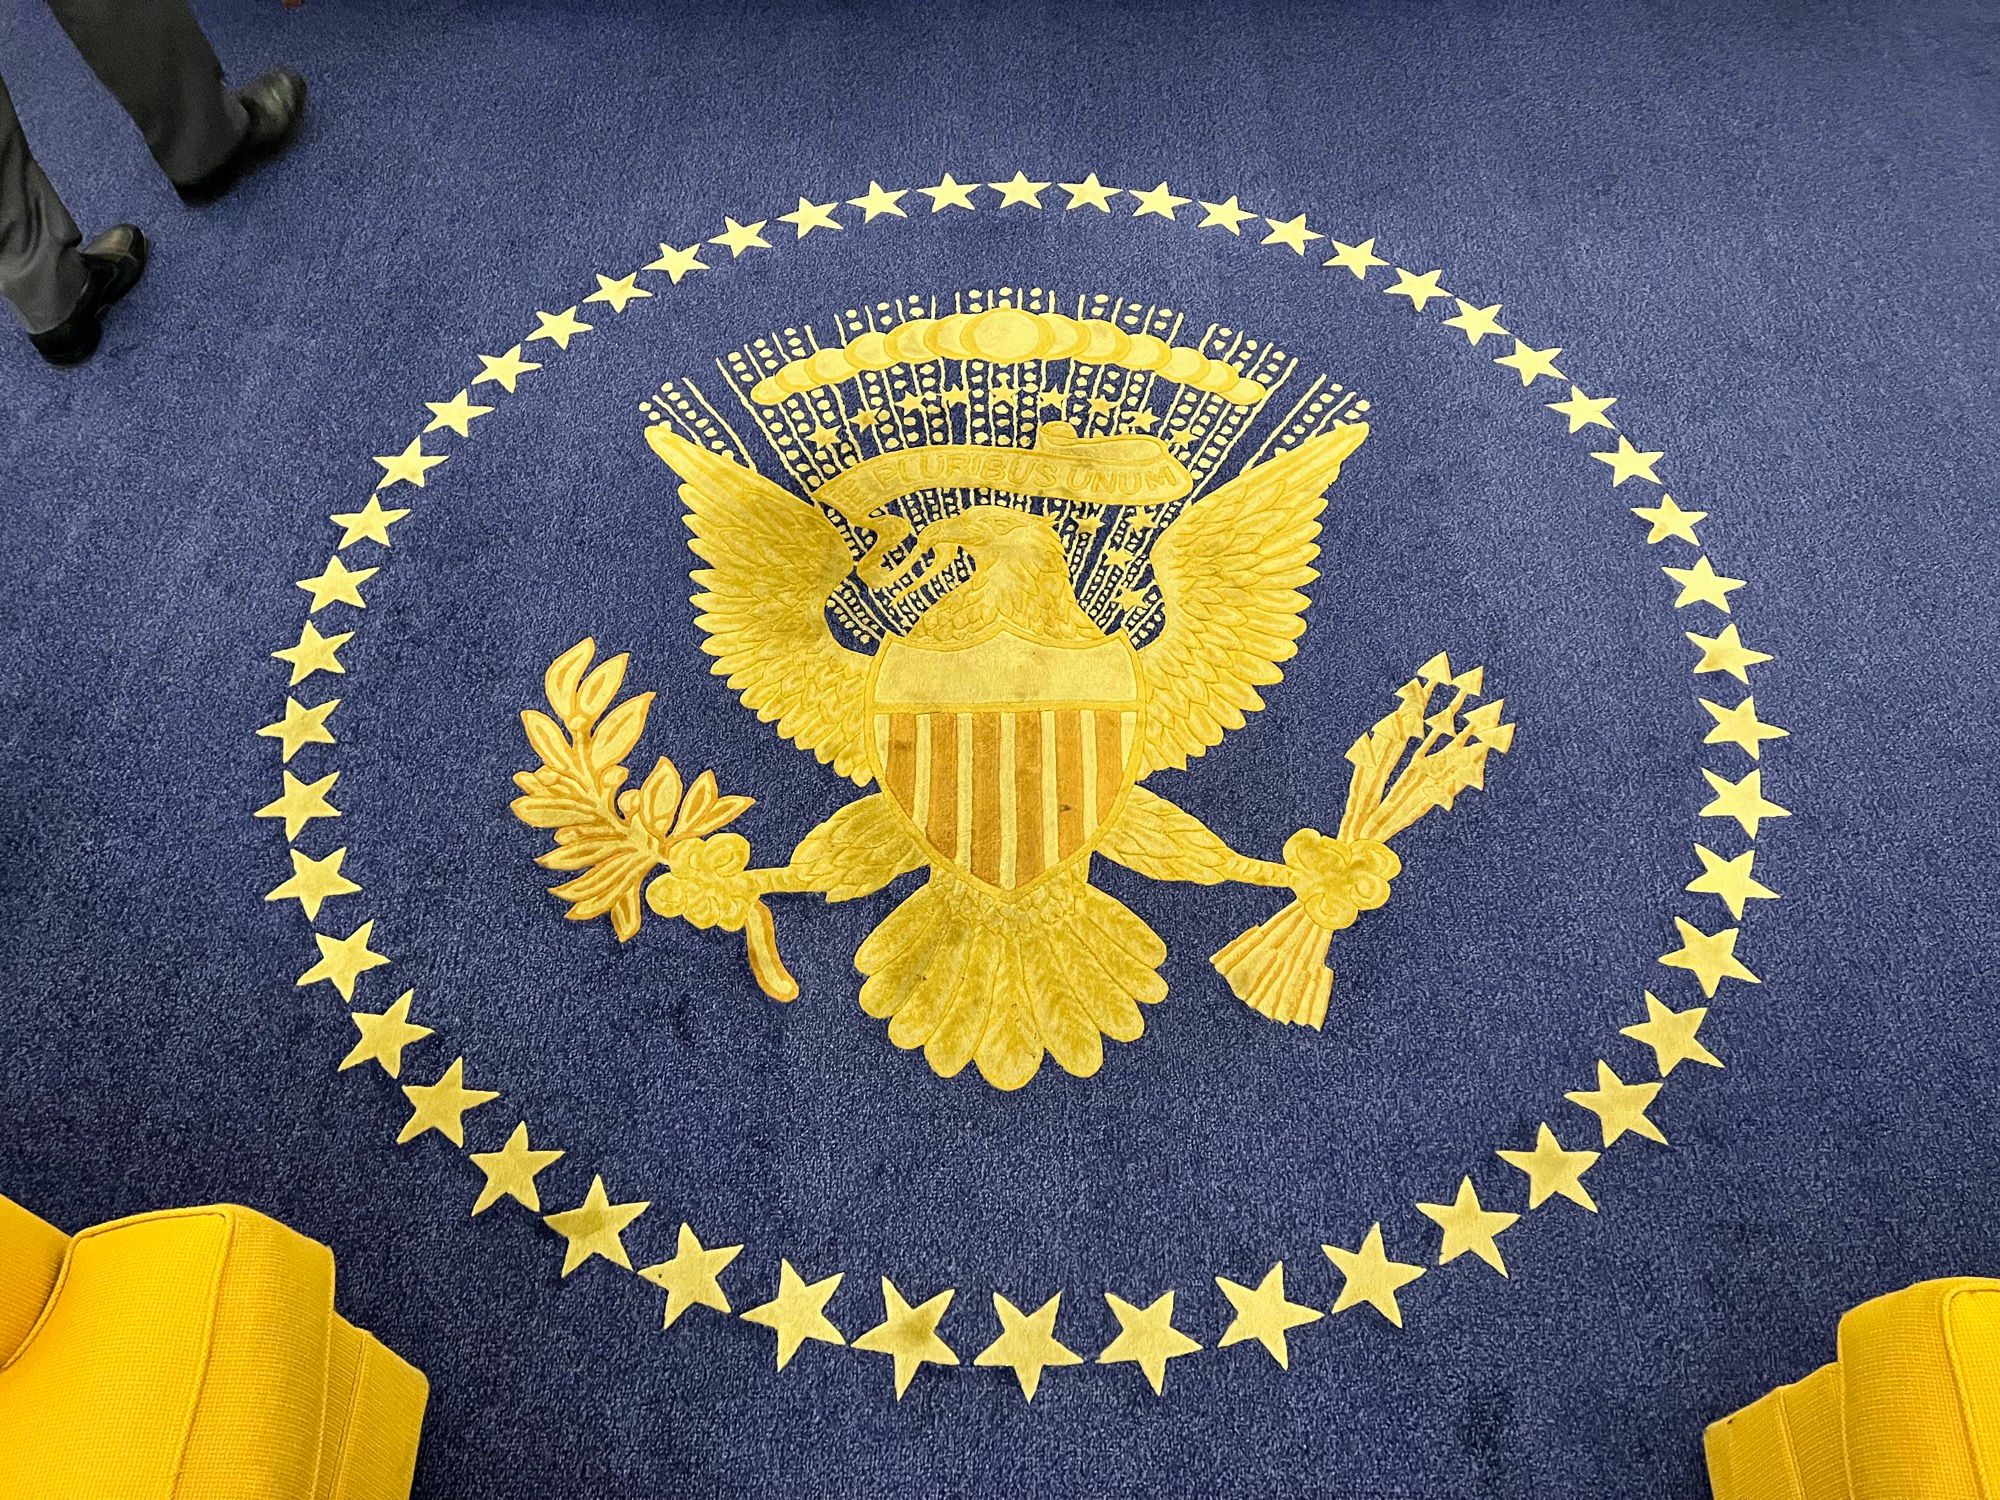 Oval Office Presidential Seal